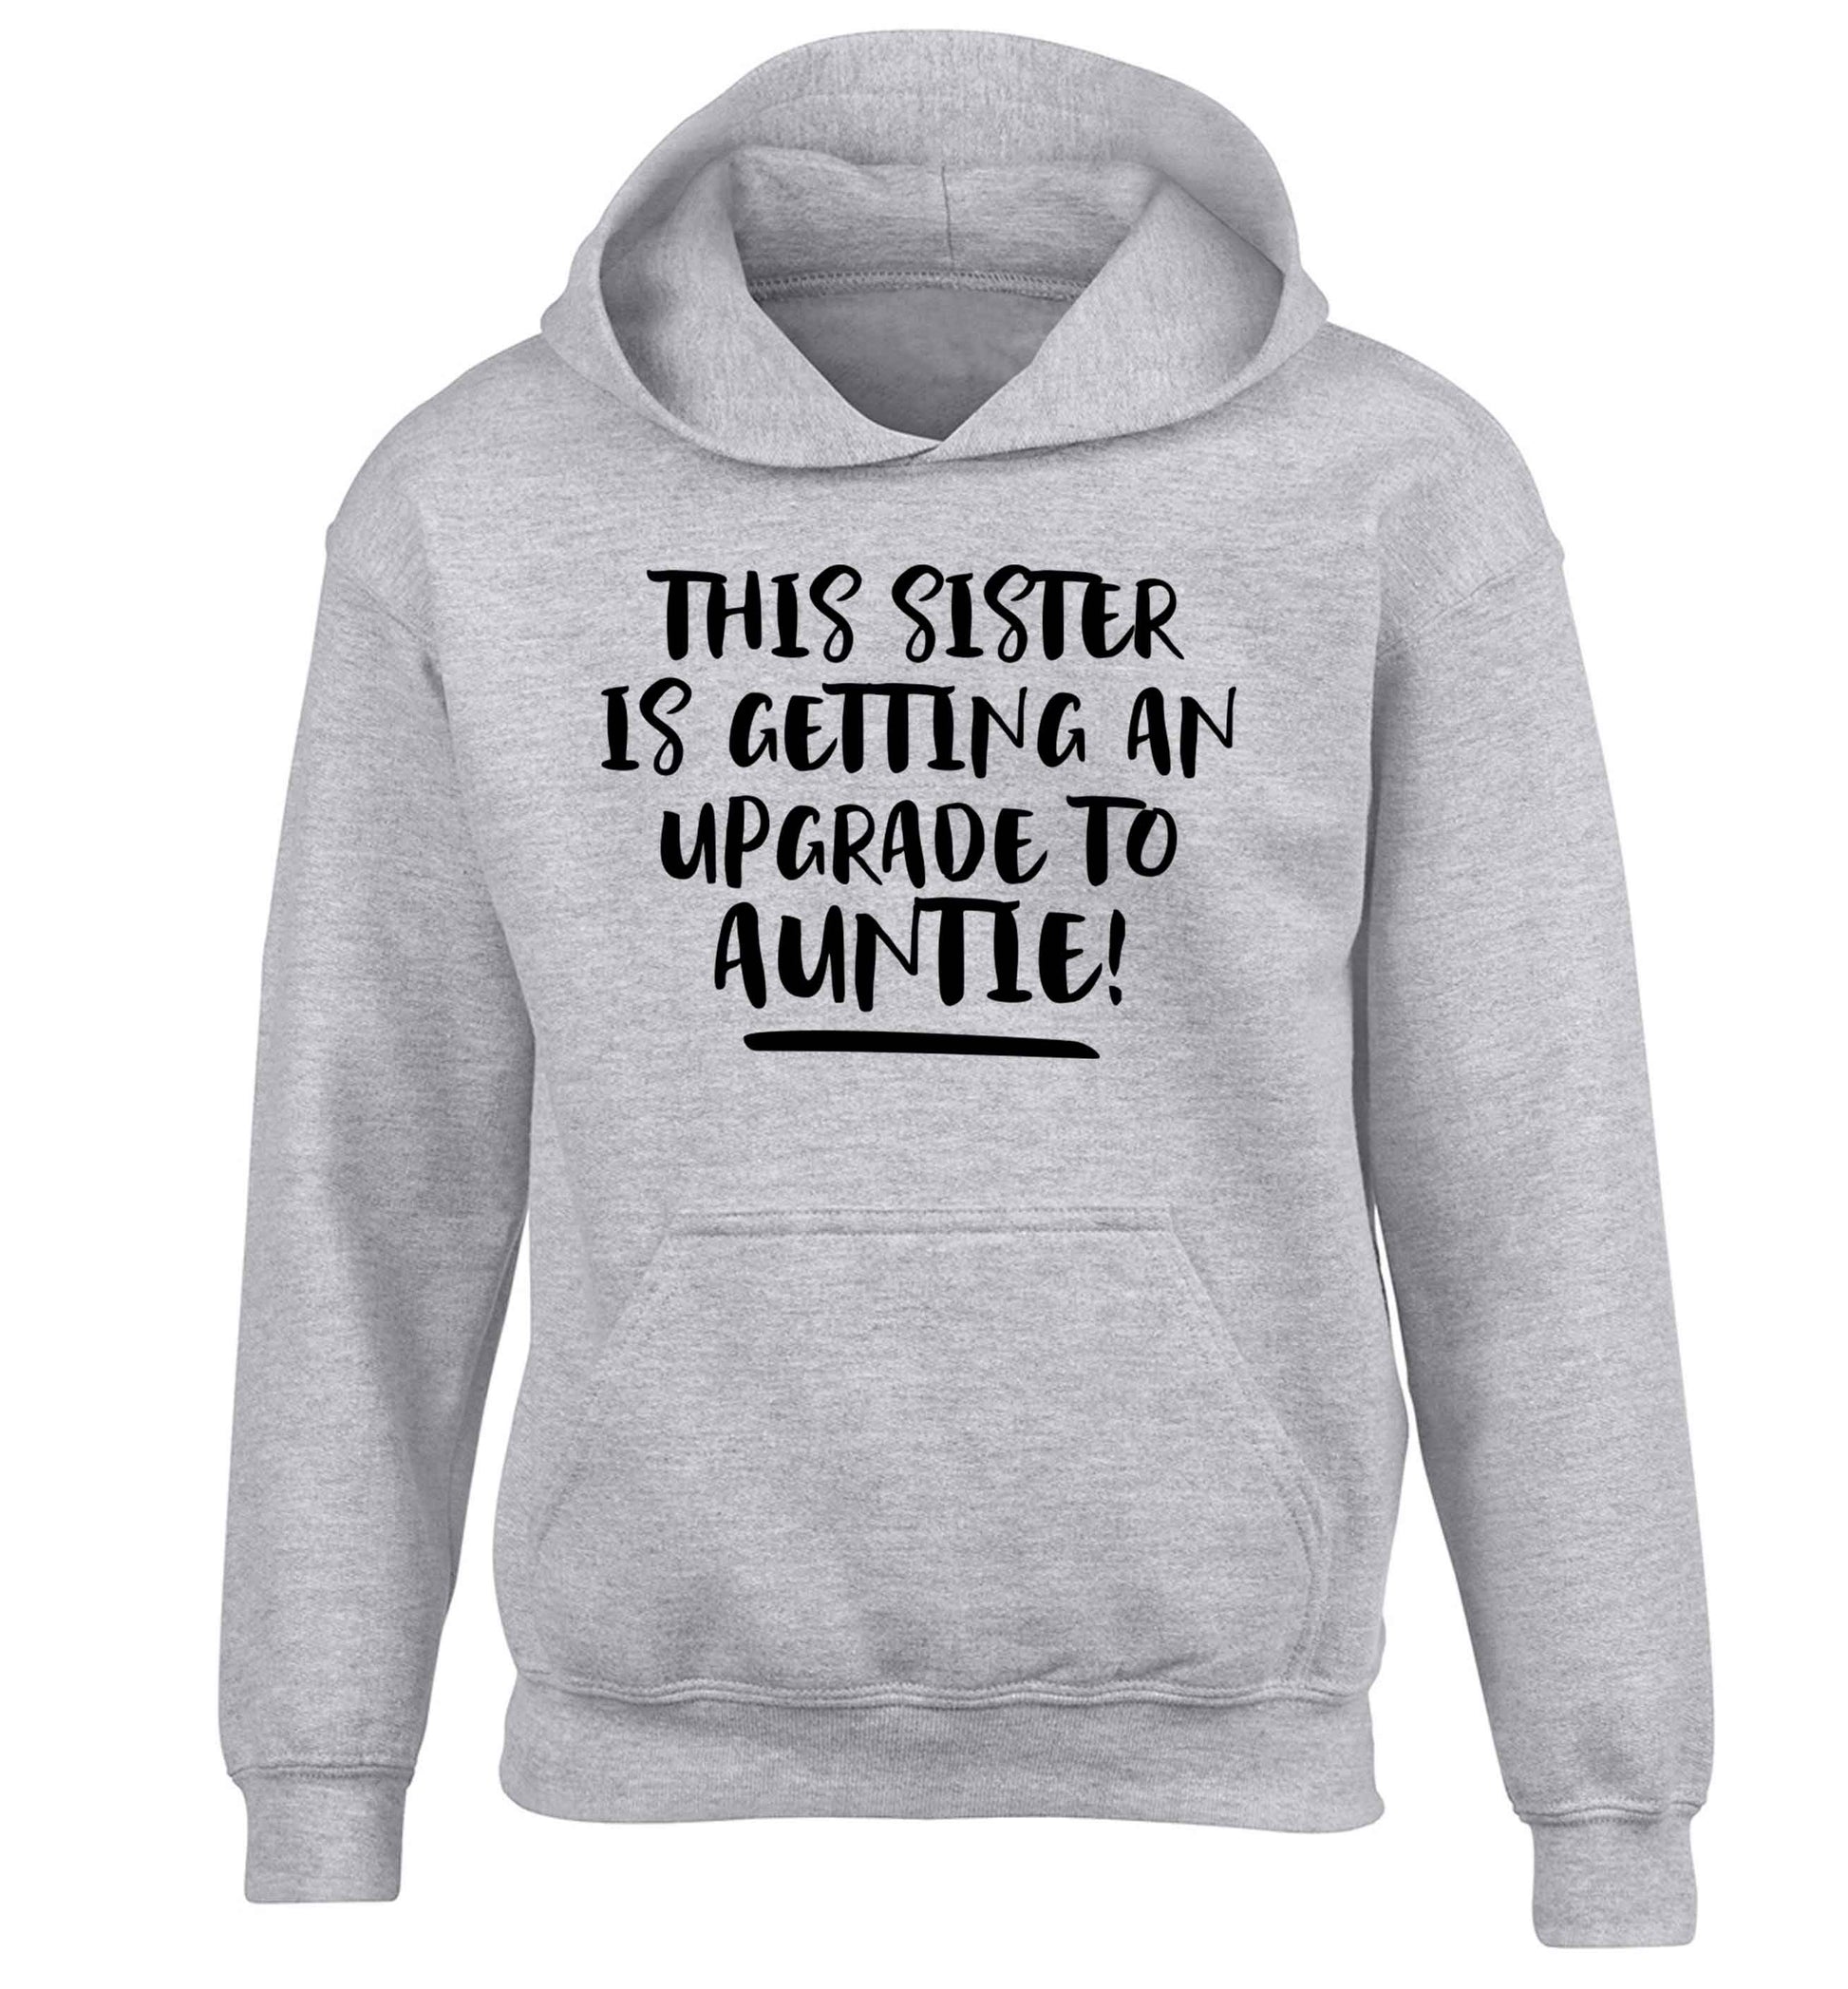 This sister is getting an upgrade to auntie! children's grey hoodie 12-13 Years